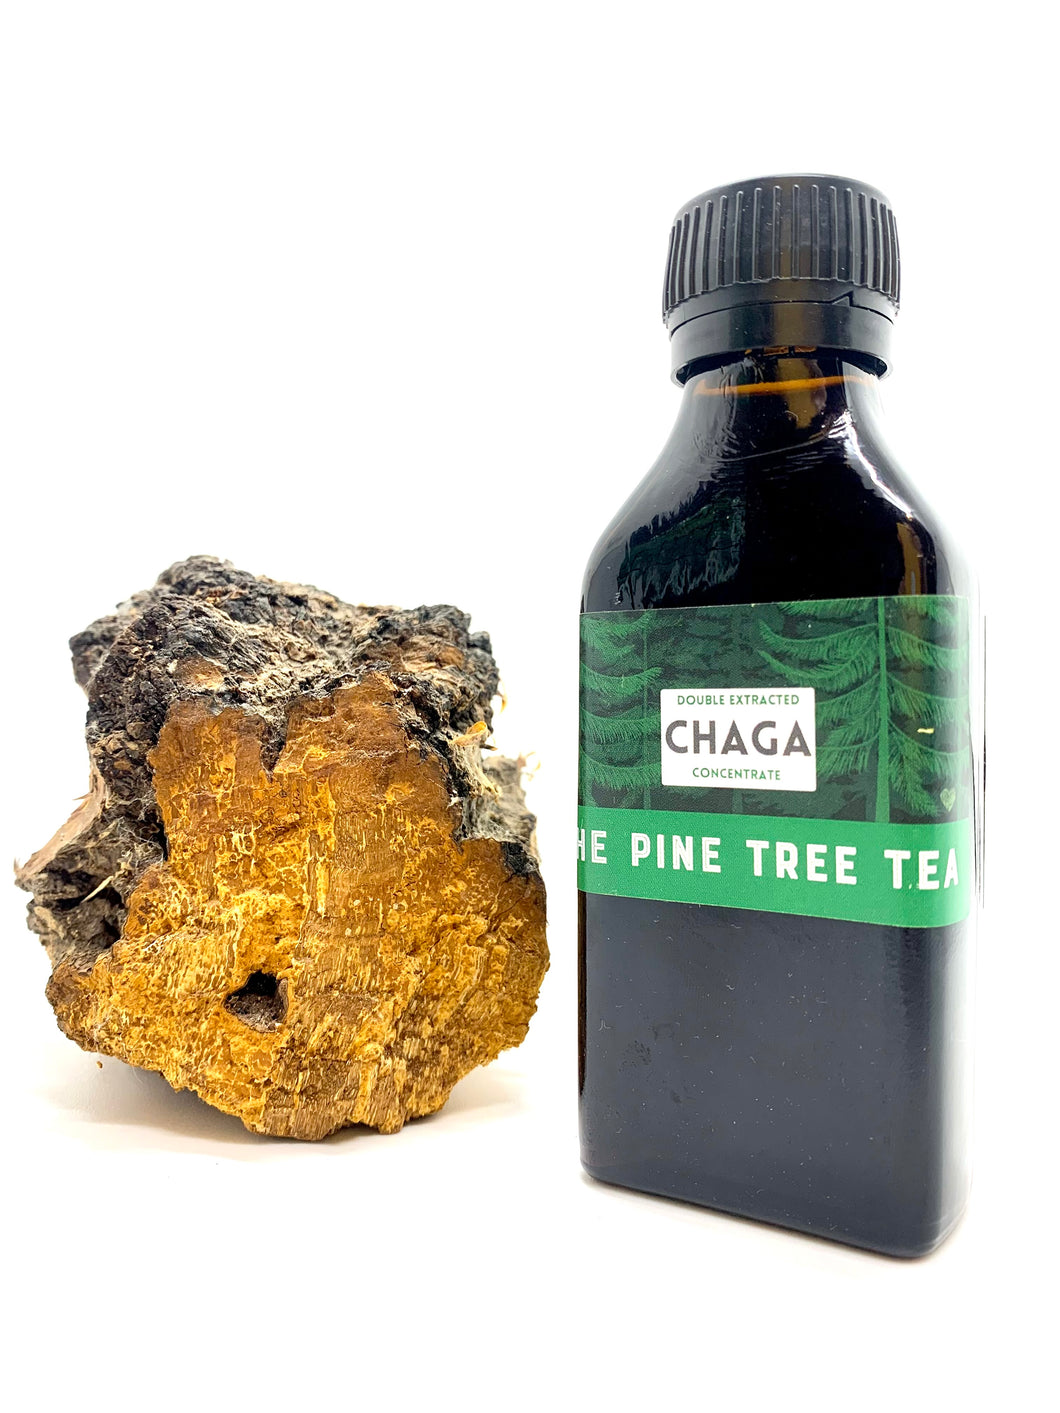 Wildcrafted double extracted Chaga concentrate - Medium  3.5 oz